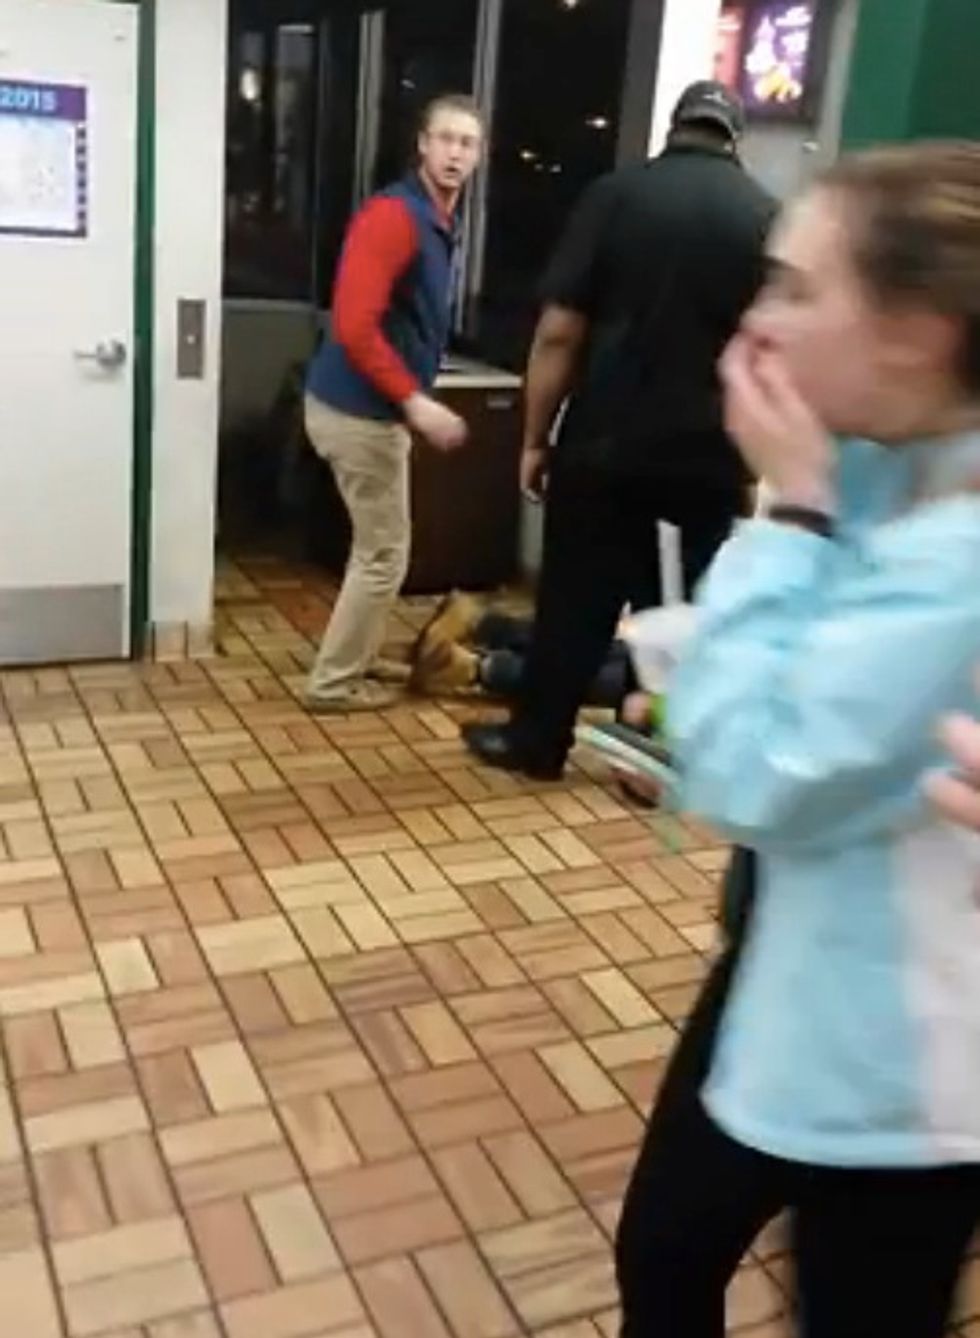 Lovin' Beats Hatin'?: McDonald's Employee Has Enough of Late-Night Troublemaker and Lets His Fist Do the Explaining